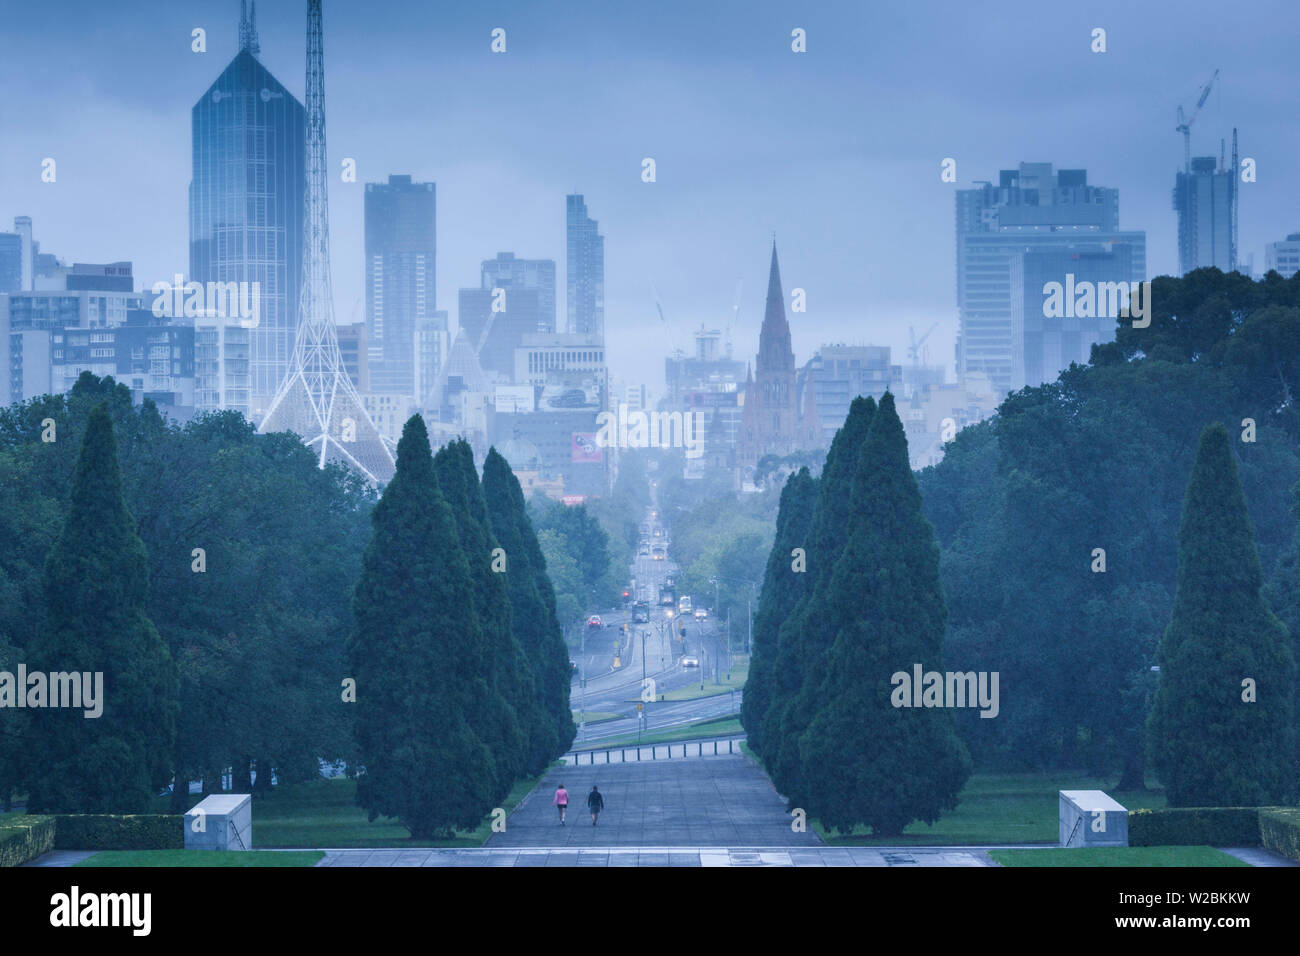 Australia, Victoria, VIC, Melbourne, skyline from the Shrine of Remebrance in the Kings Domain, morning Stock Photo